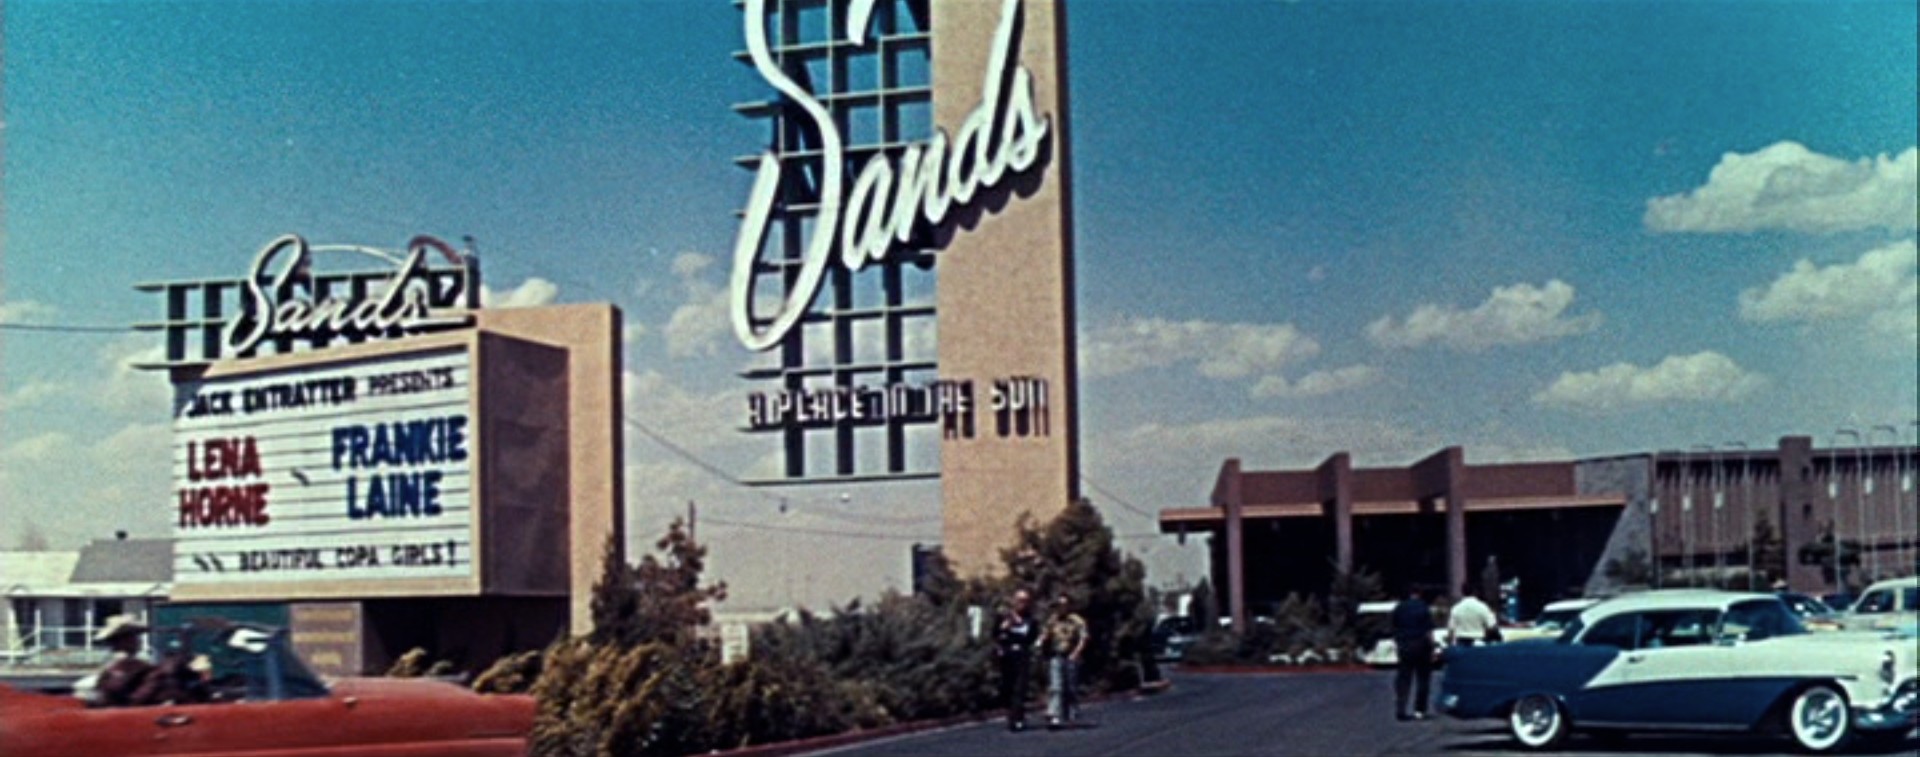 Old Vegas Sands Hotel and Casino sign